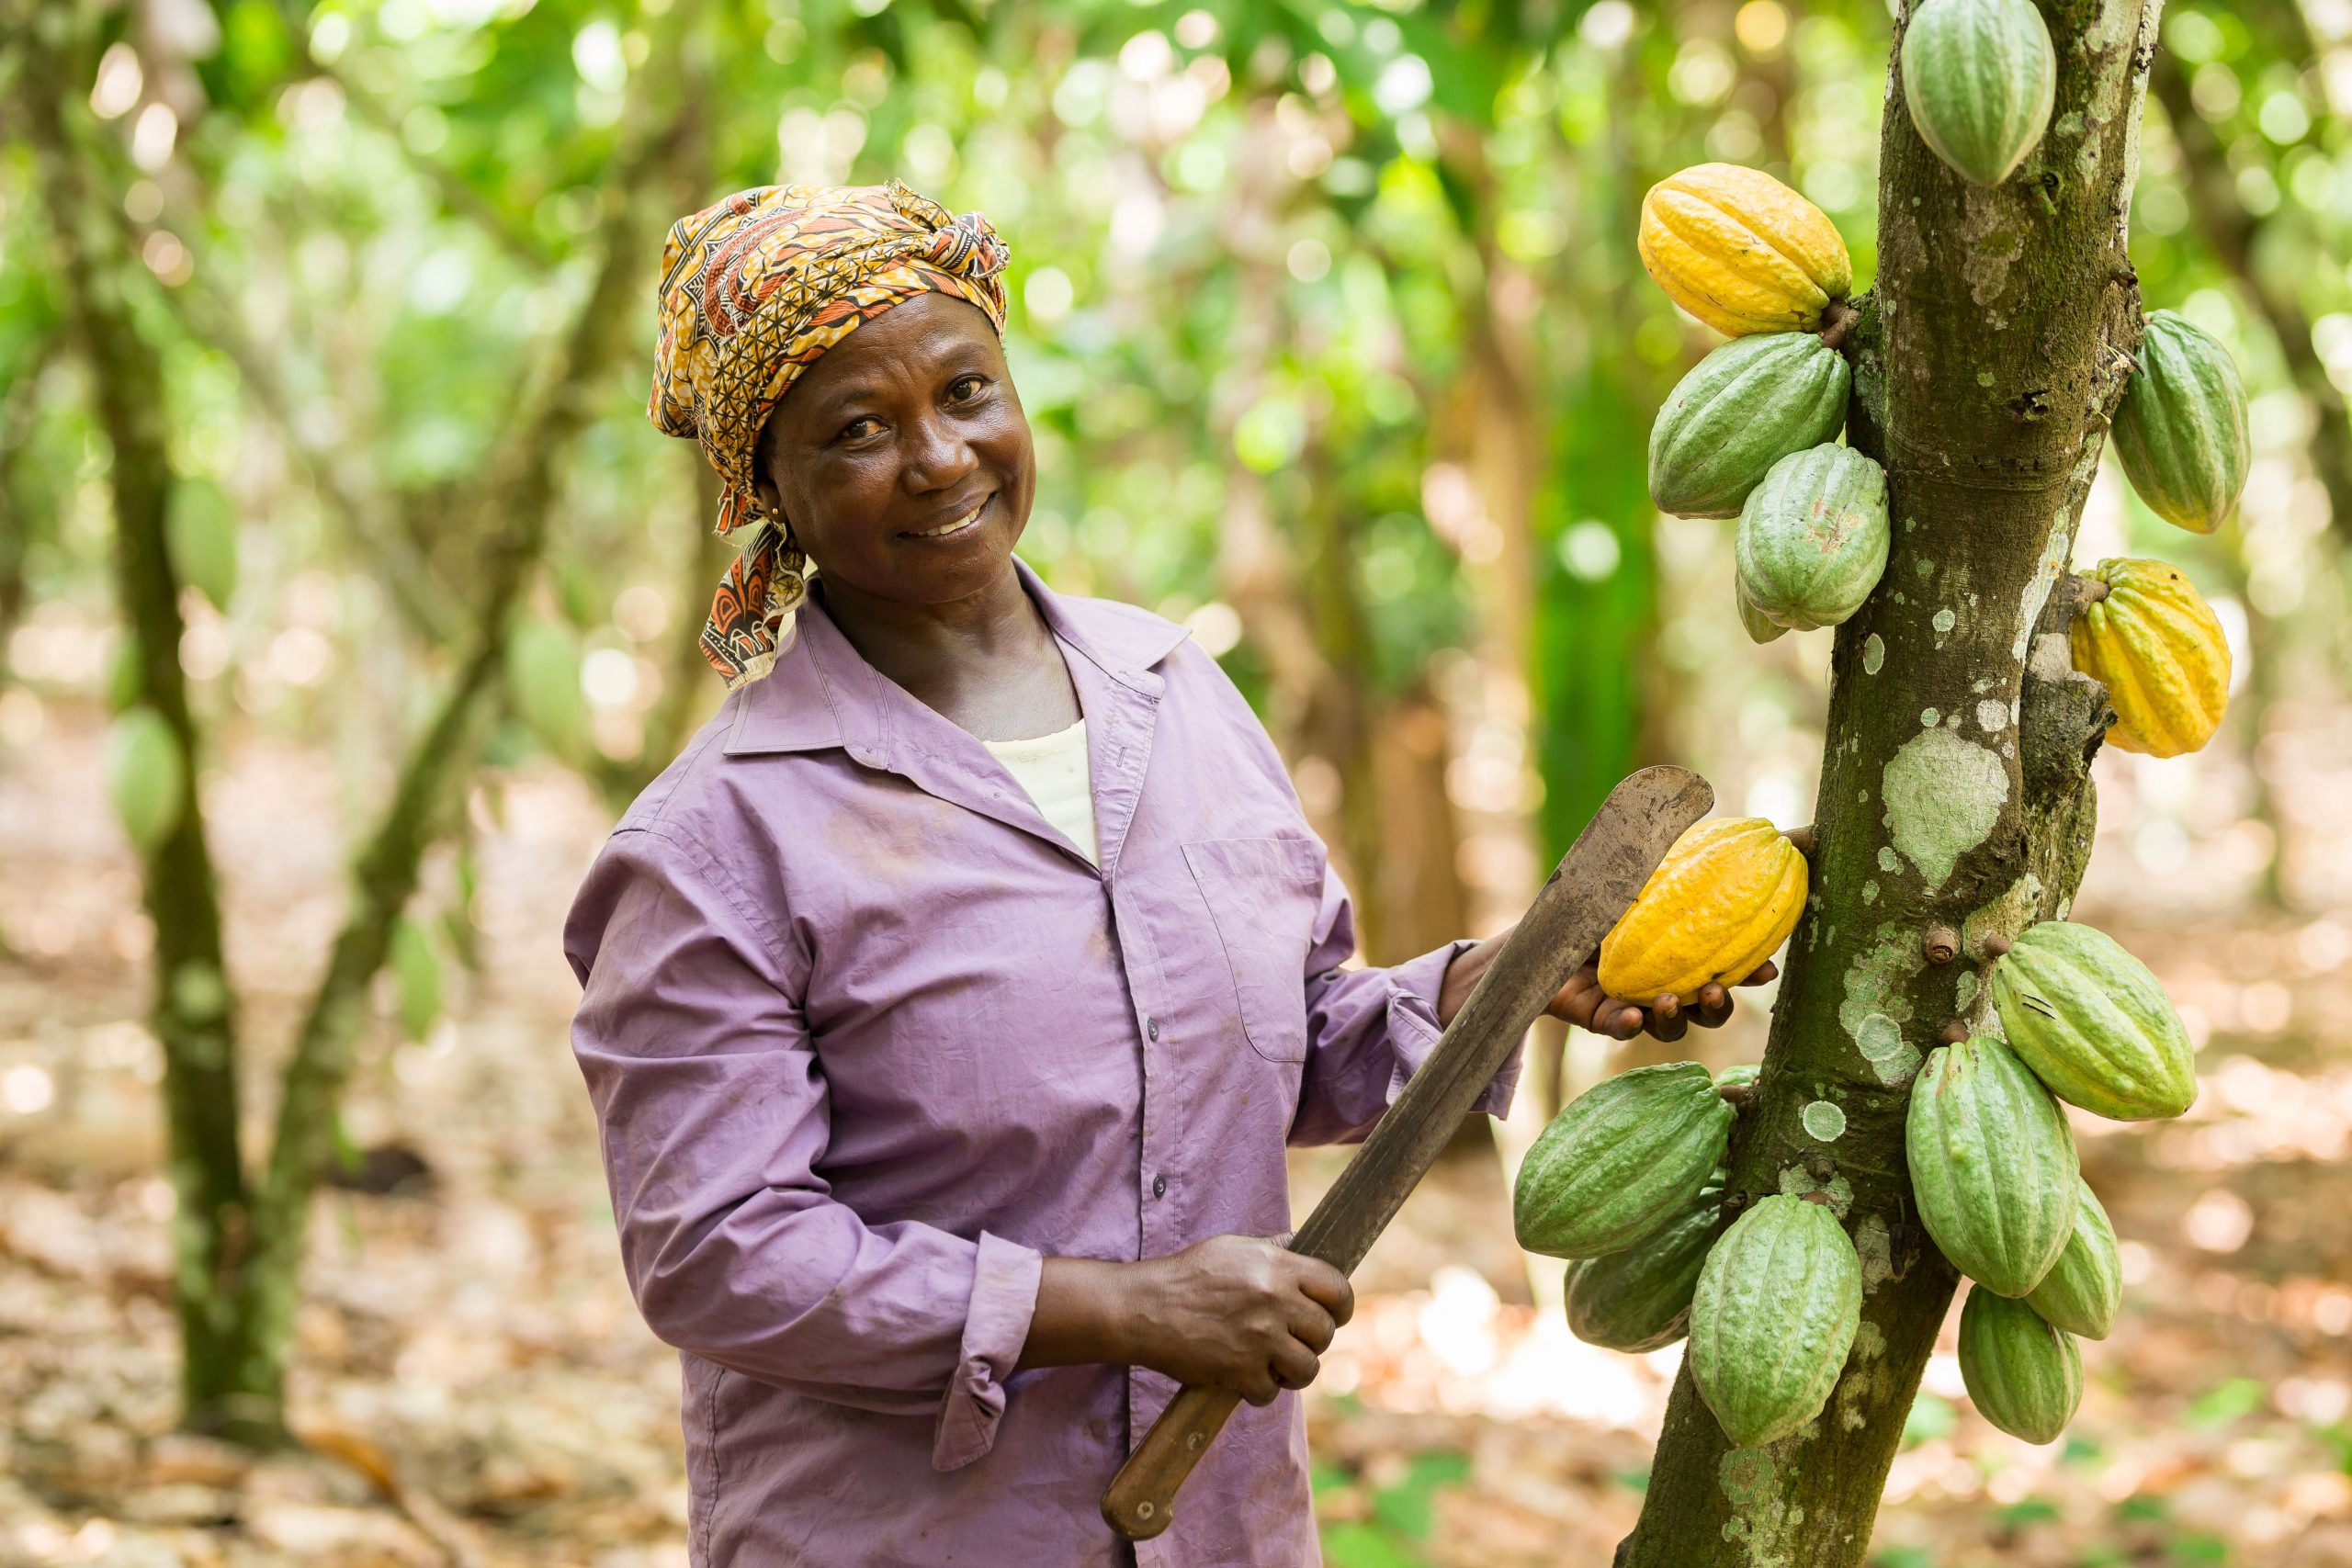 Asunafo North, Farmers Union, Small Producer Organisation of the Year Fairtrade International